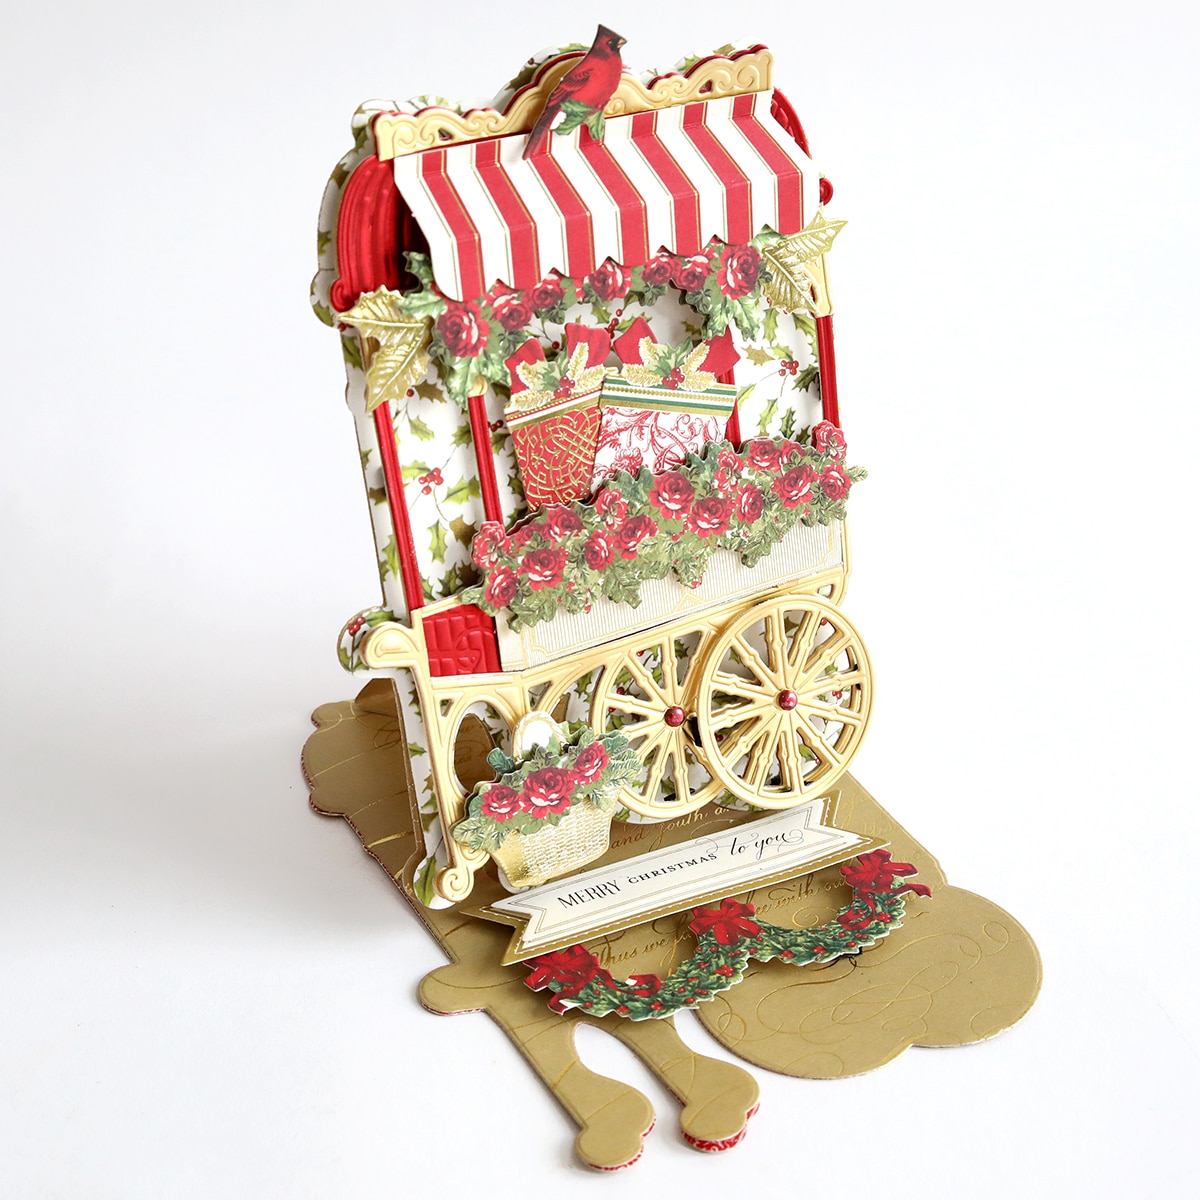 a decorative cart with flowers and a red and white striped awning.